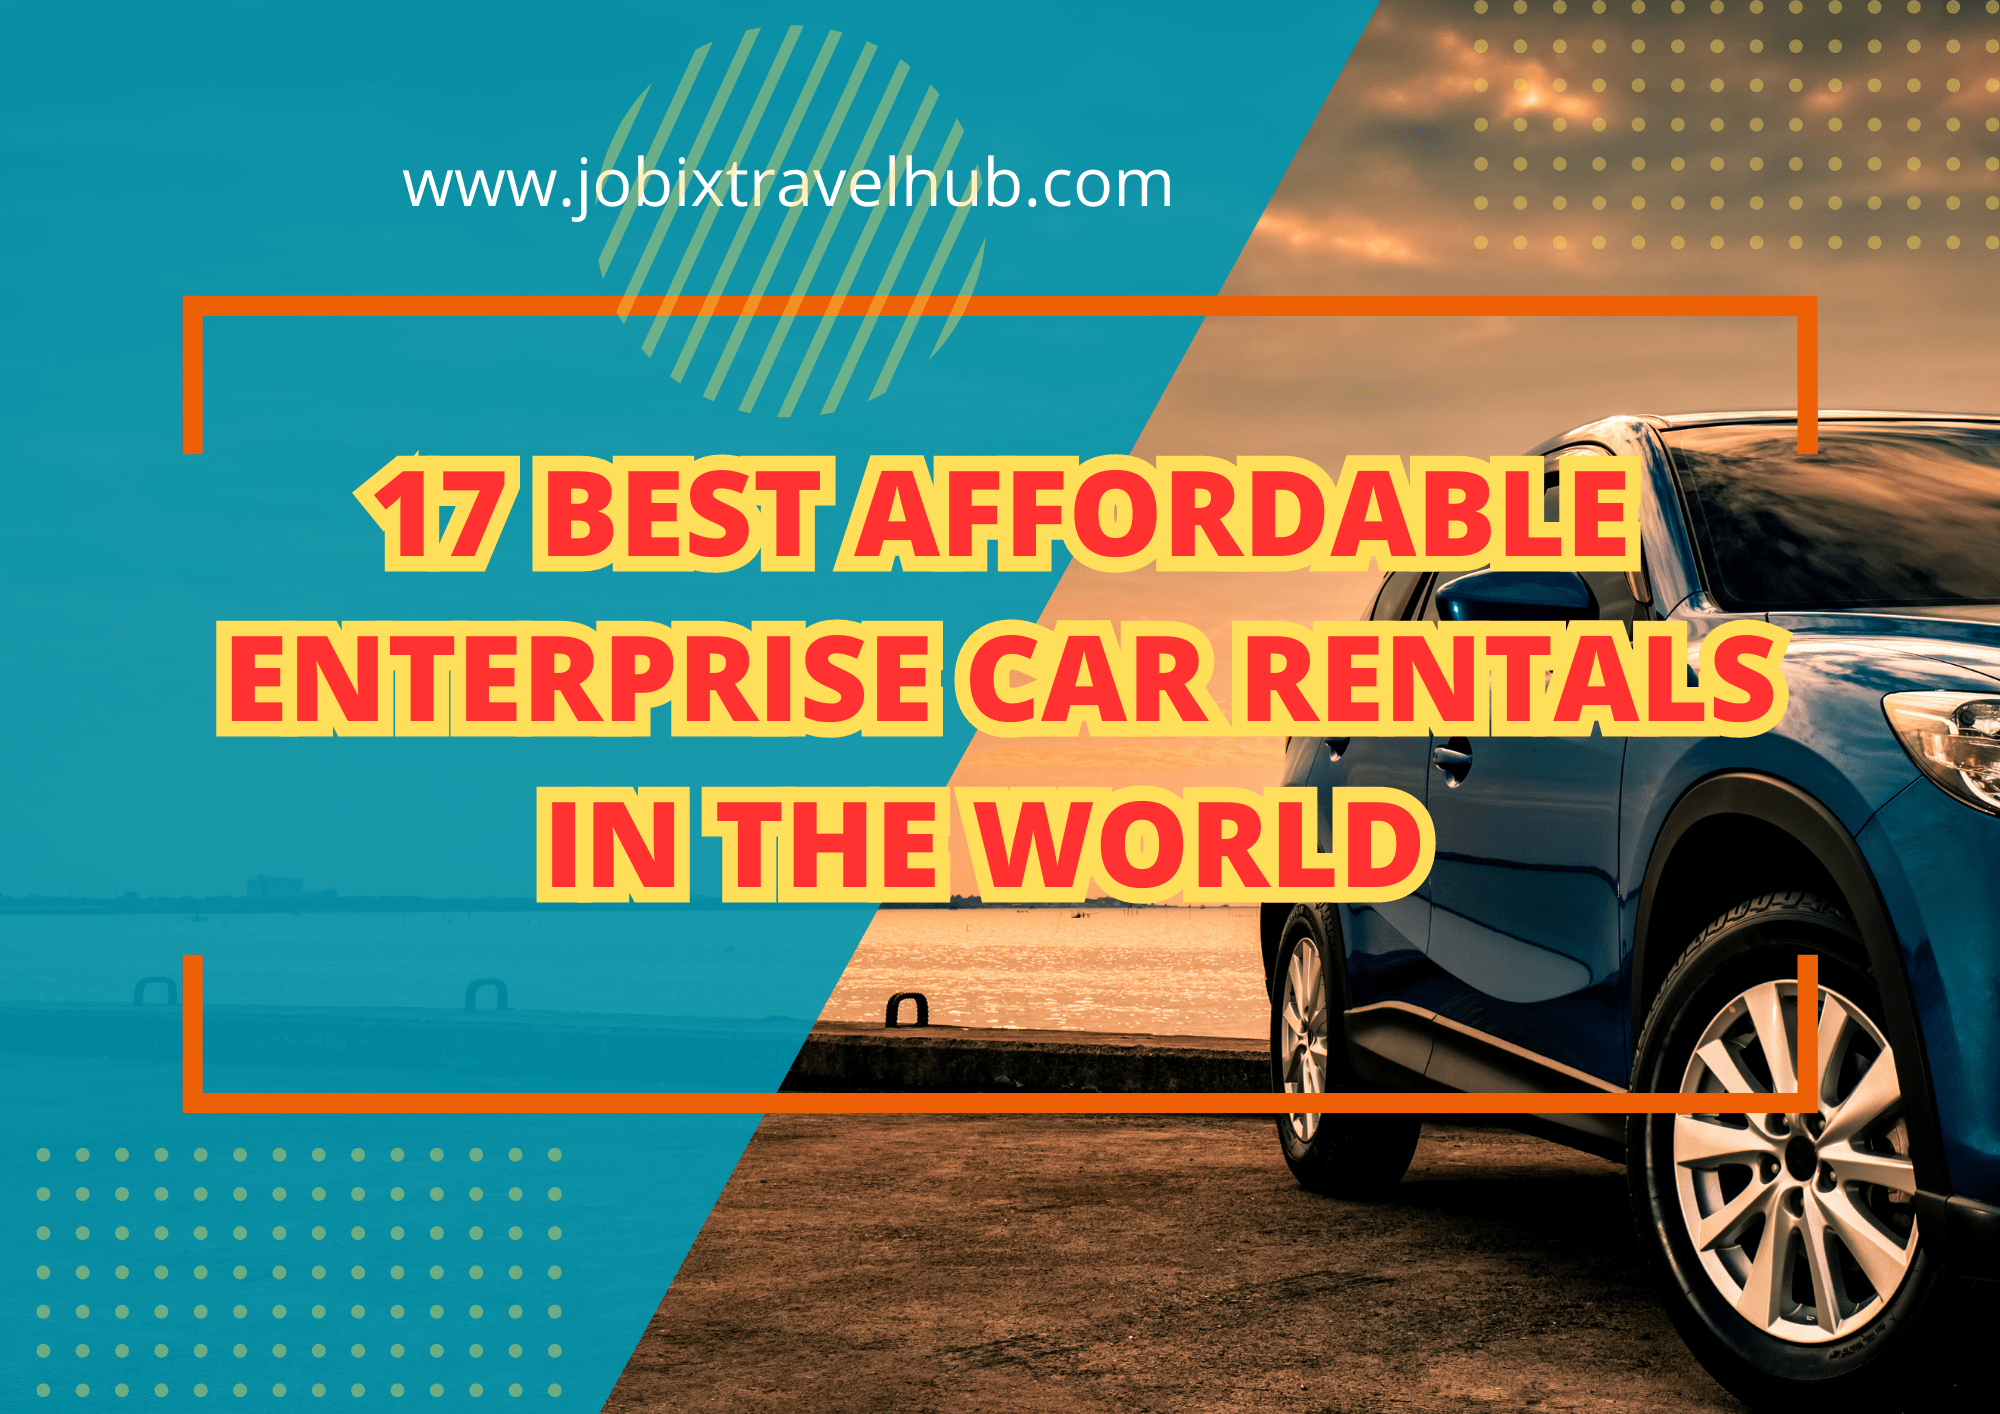 7 best affordable enterprise car rentals in the world Read more at www.jobixtravelhub.com - Find and compare cheap flights, airline tickets, and cheap airfare. We also offer wide range of travel services such as hotel booking, car rentals, and travel insurance.